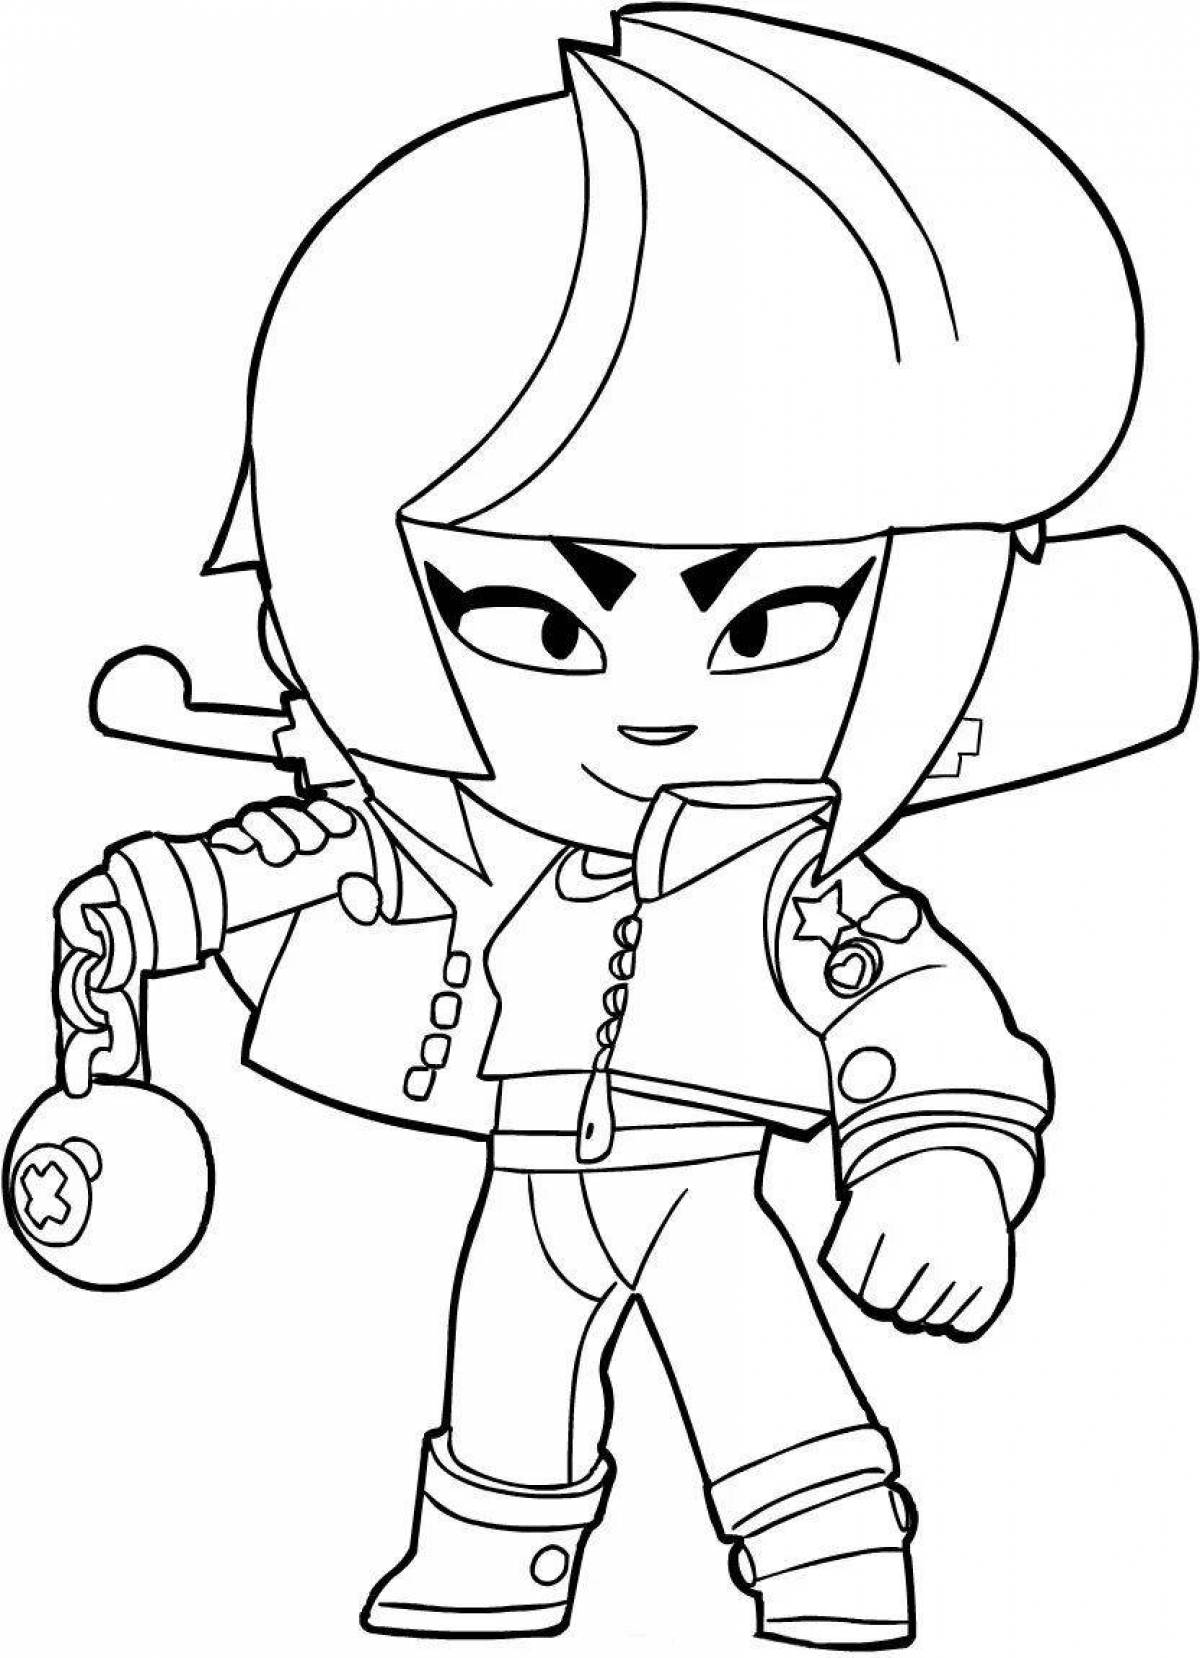 Color frenzied brawl on coloring page